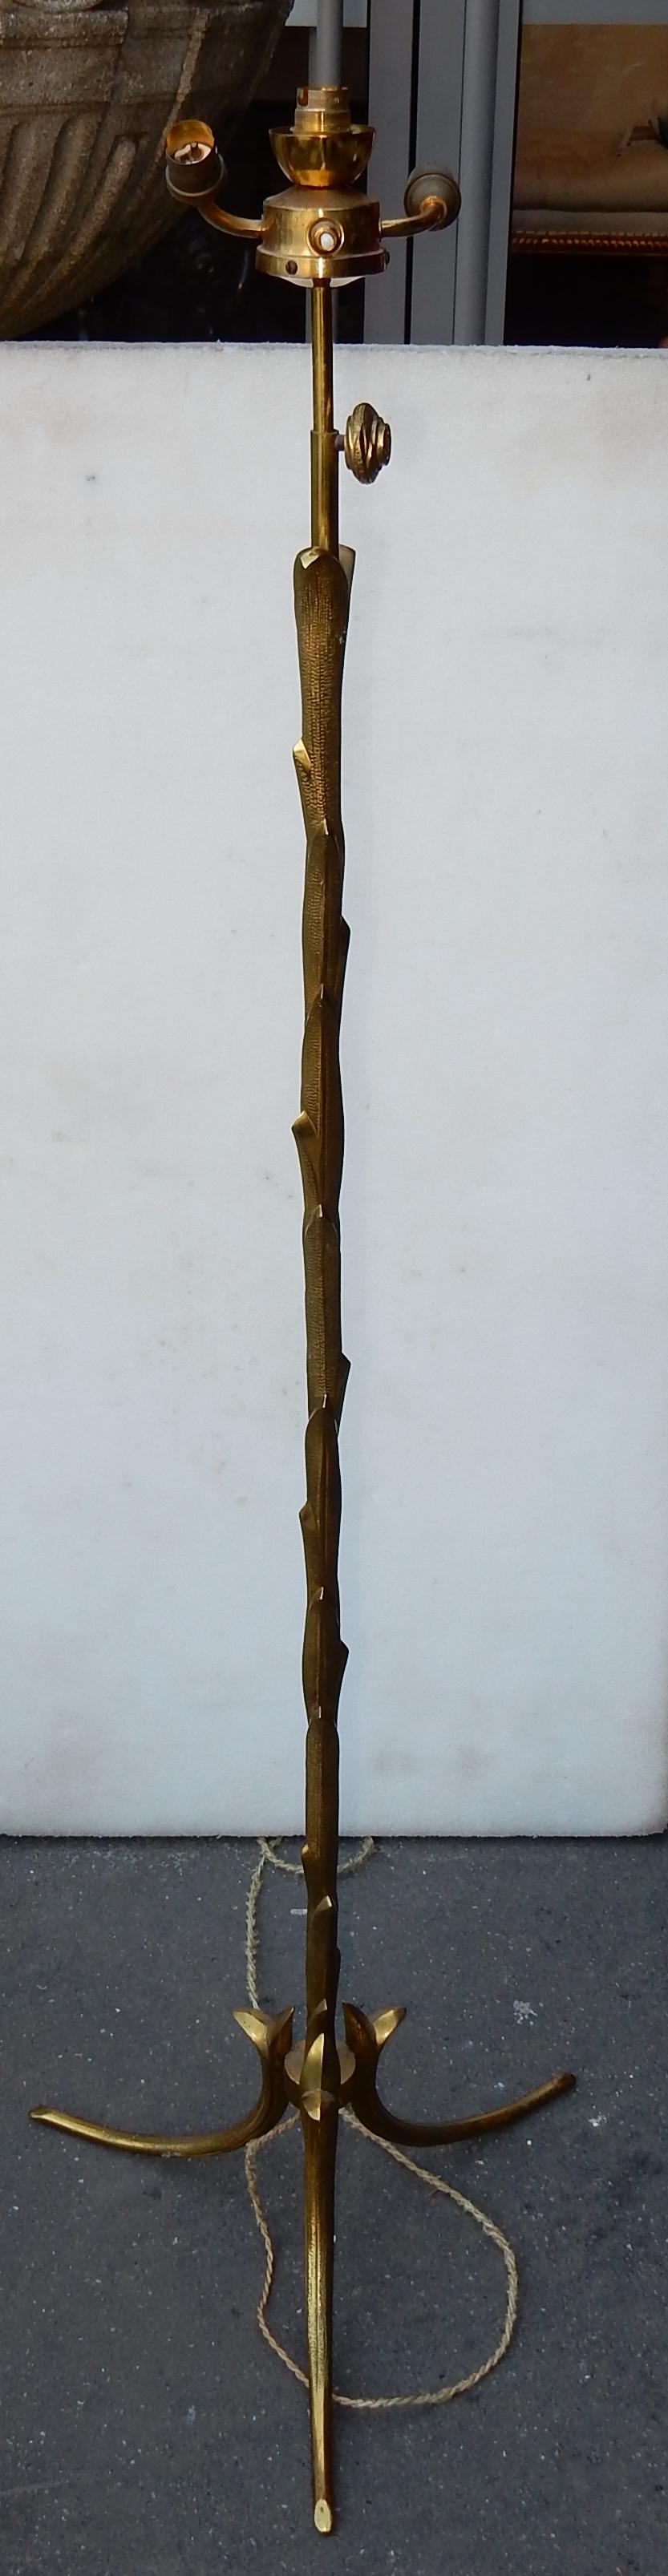 Bronze lamppost and golden brass, good condition, circa 1950-1970, screwed elements, was has decoration of palm tree adjustable.